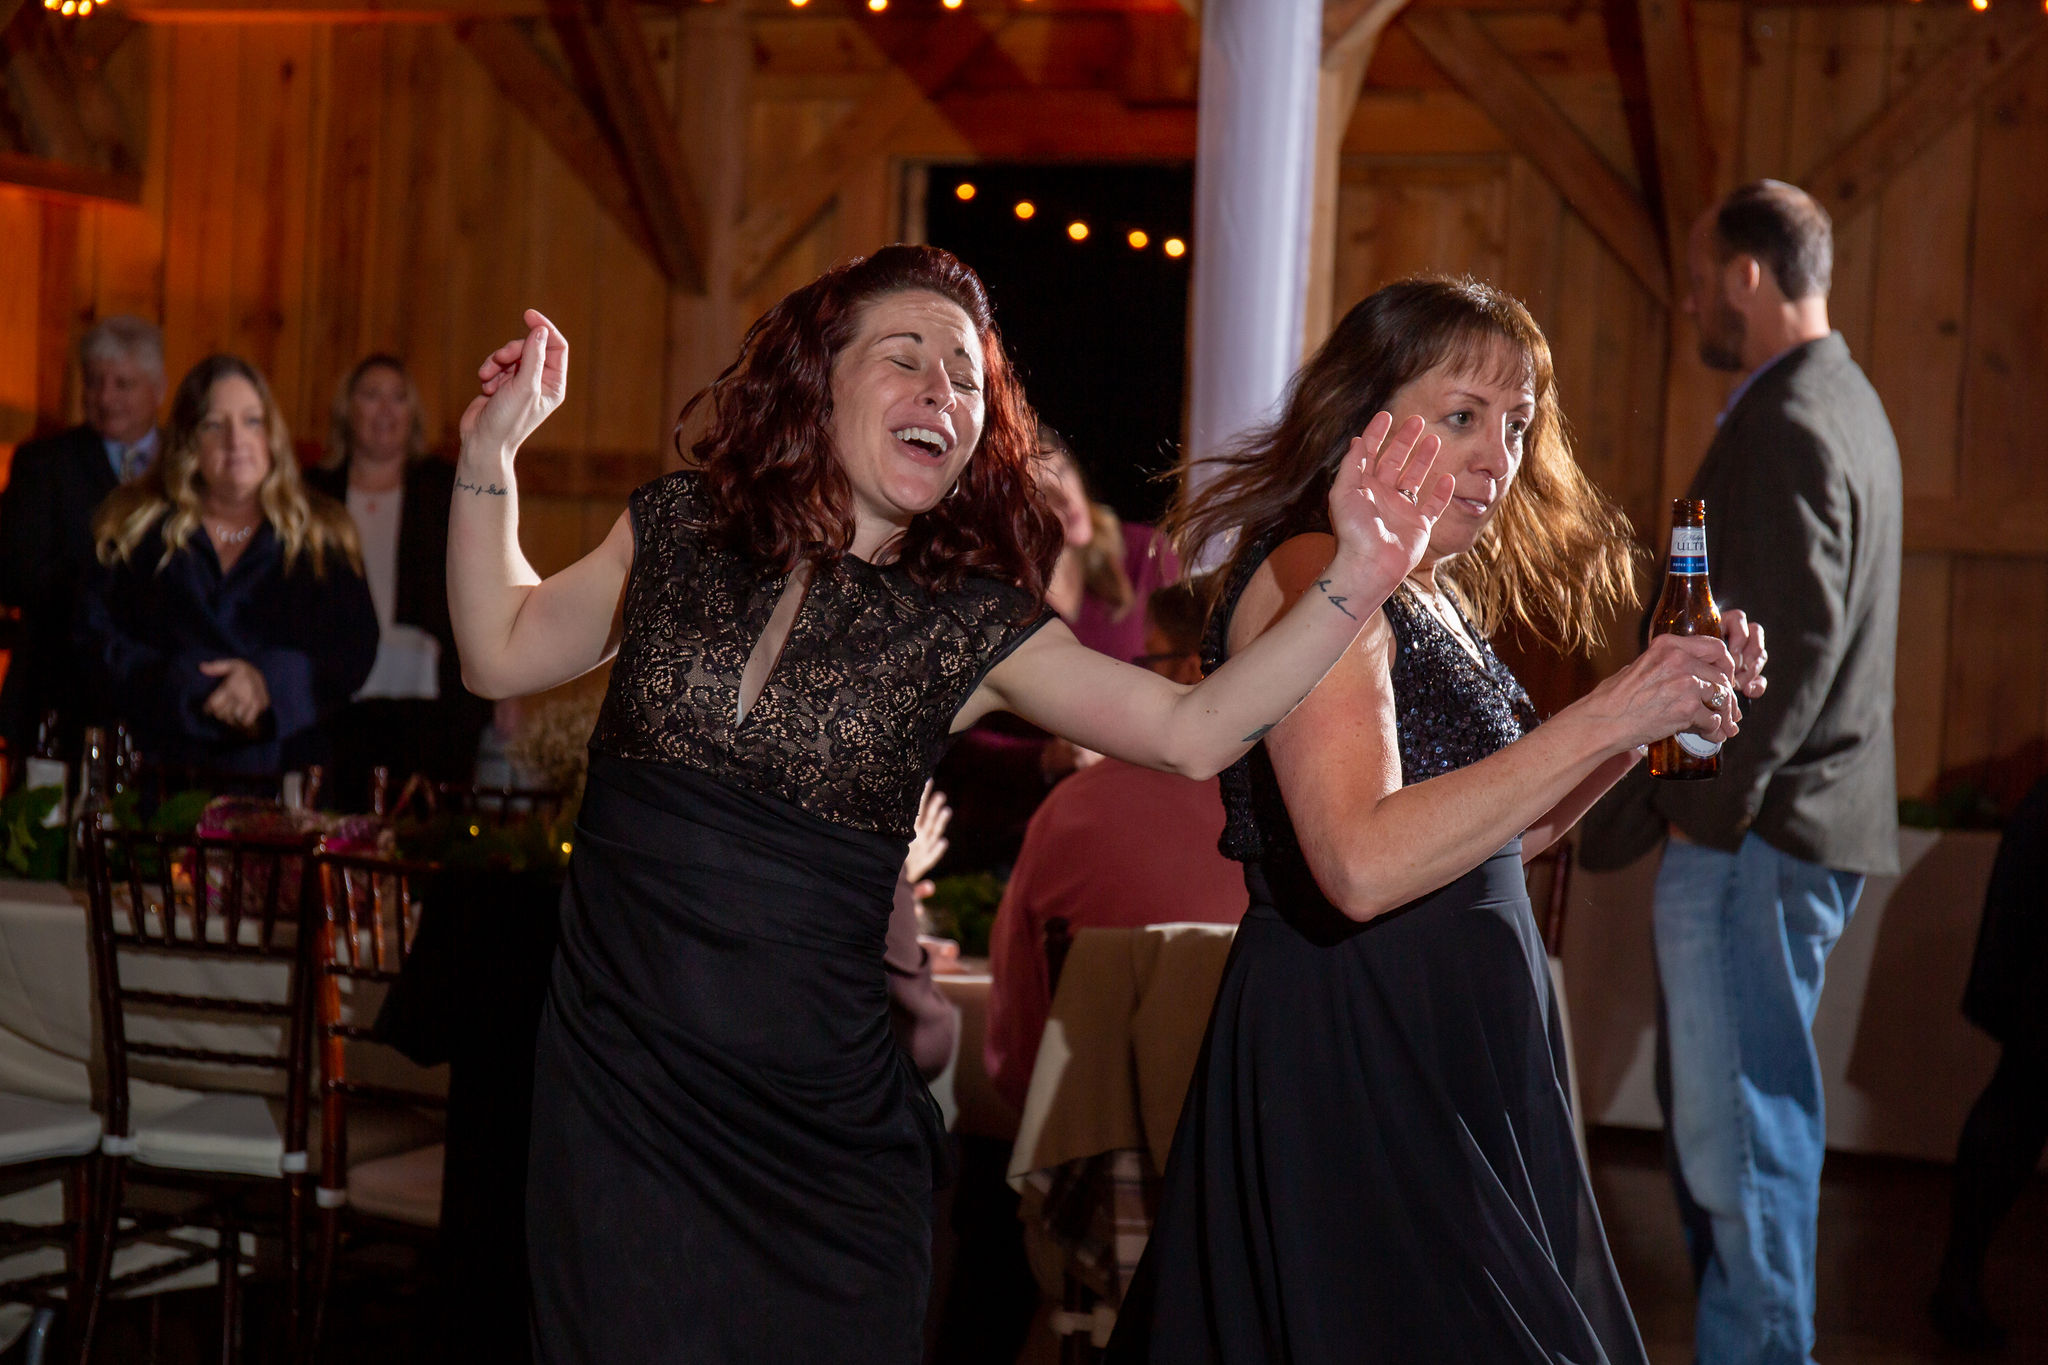 Some of the wedding guests breaking it down on the dance floor!